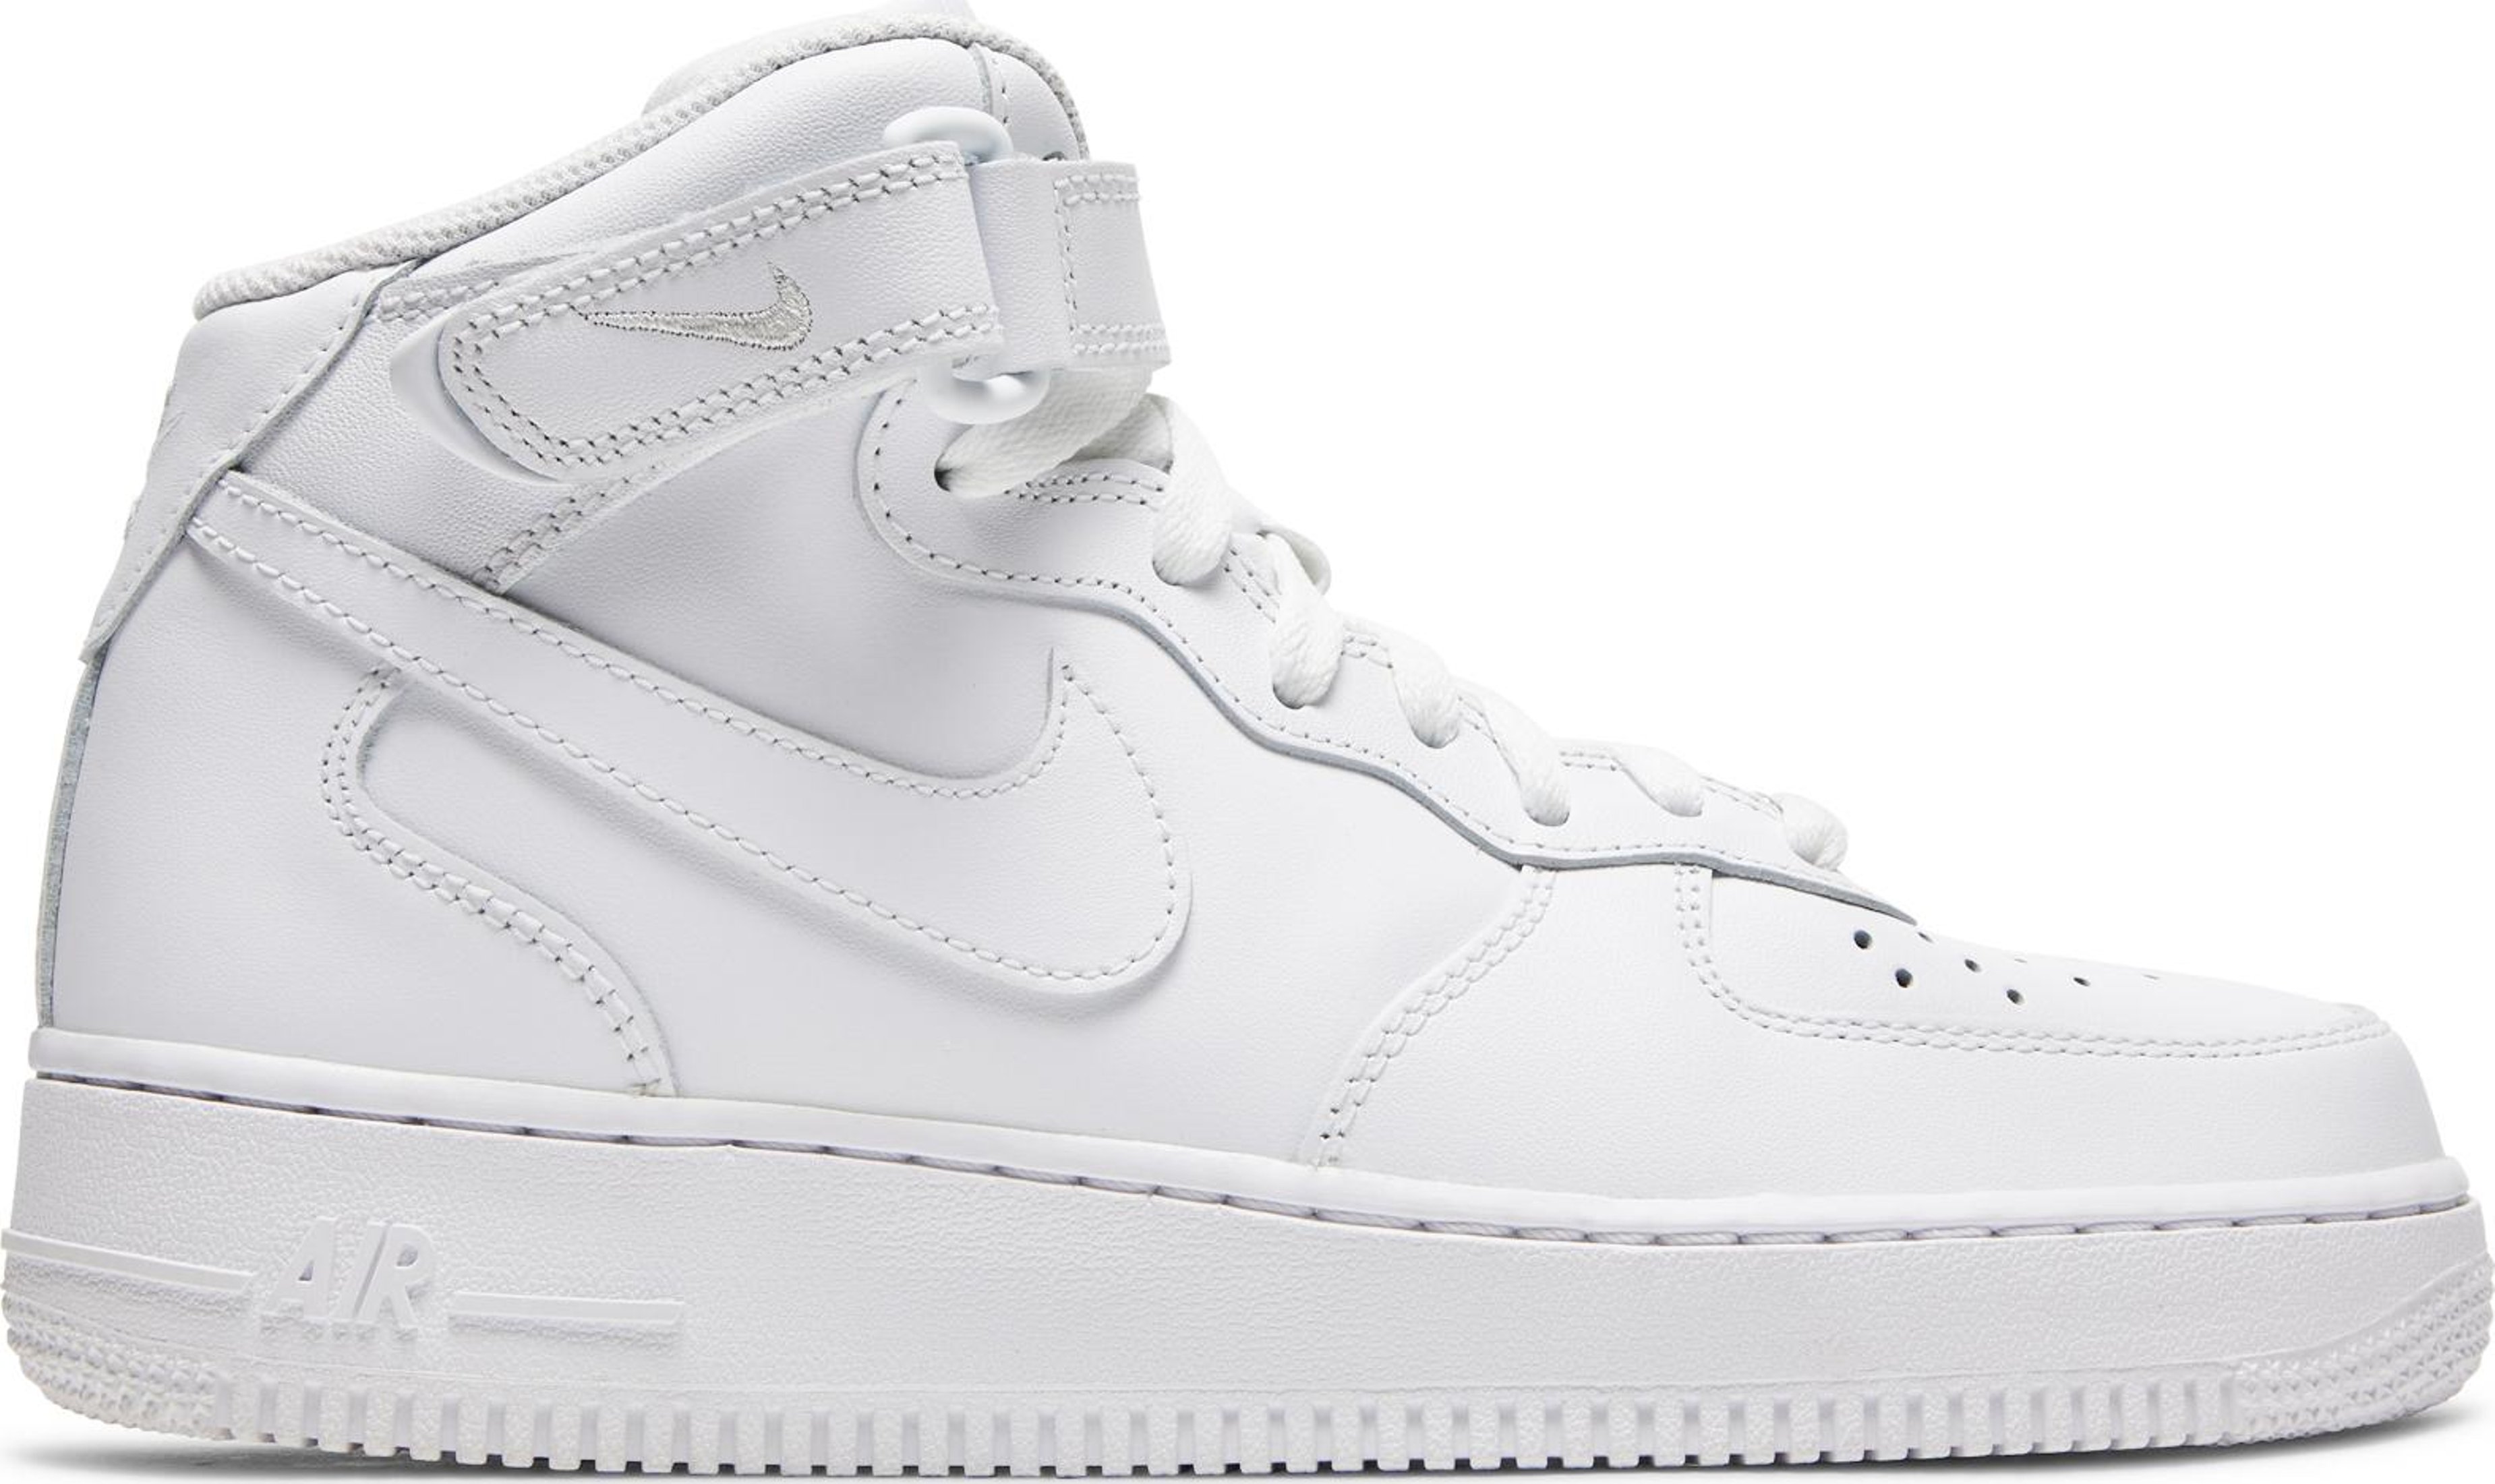 Buy Wmns Air Force 1 '07 Mid 'Triple White' - DD9625 100 | GOAT